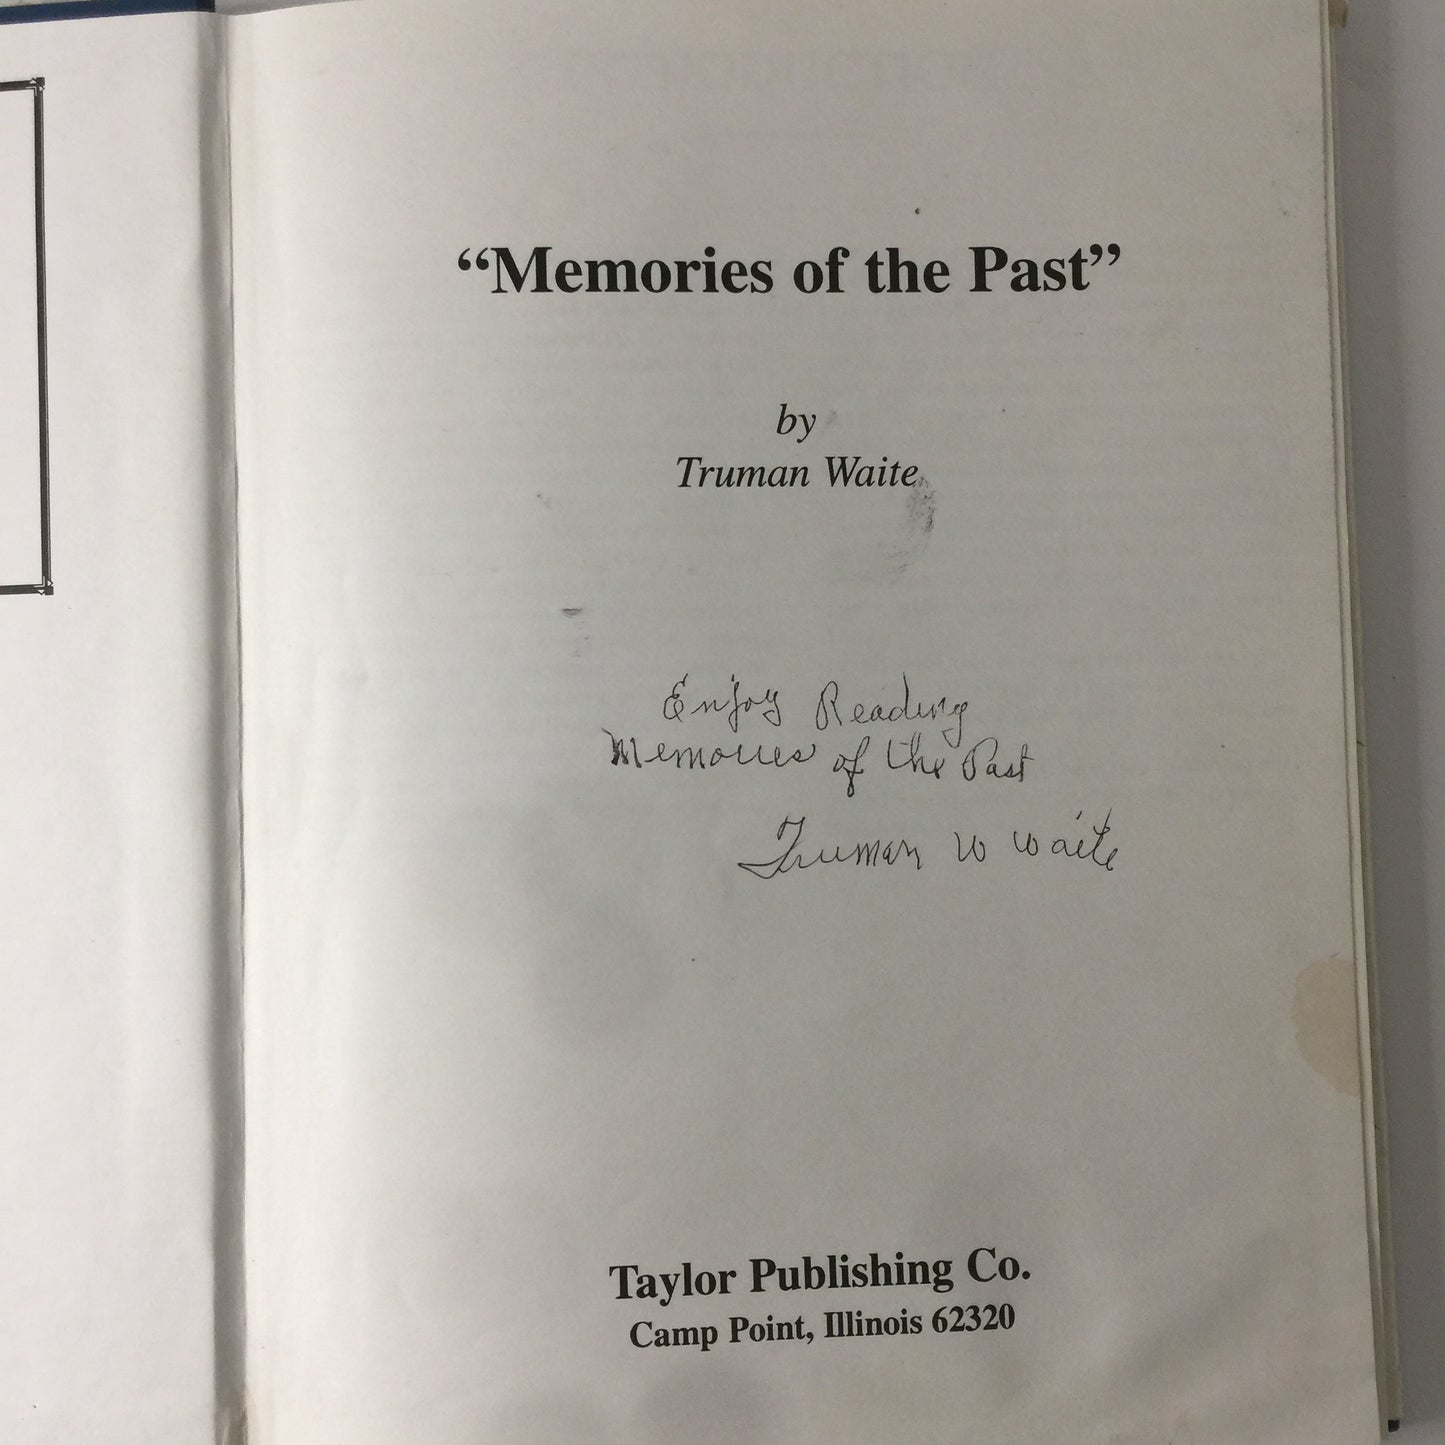 “Memories of the Past” - Truman Waite - 1st Edition Signed - Limited Edition - 48/2000 - 1993